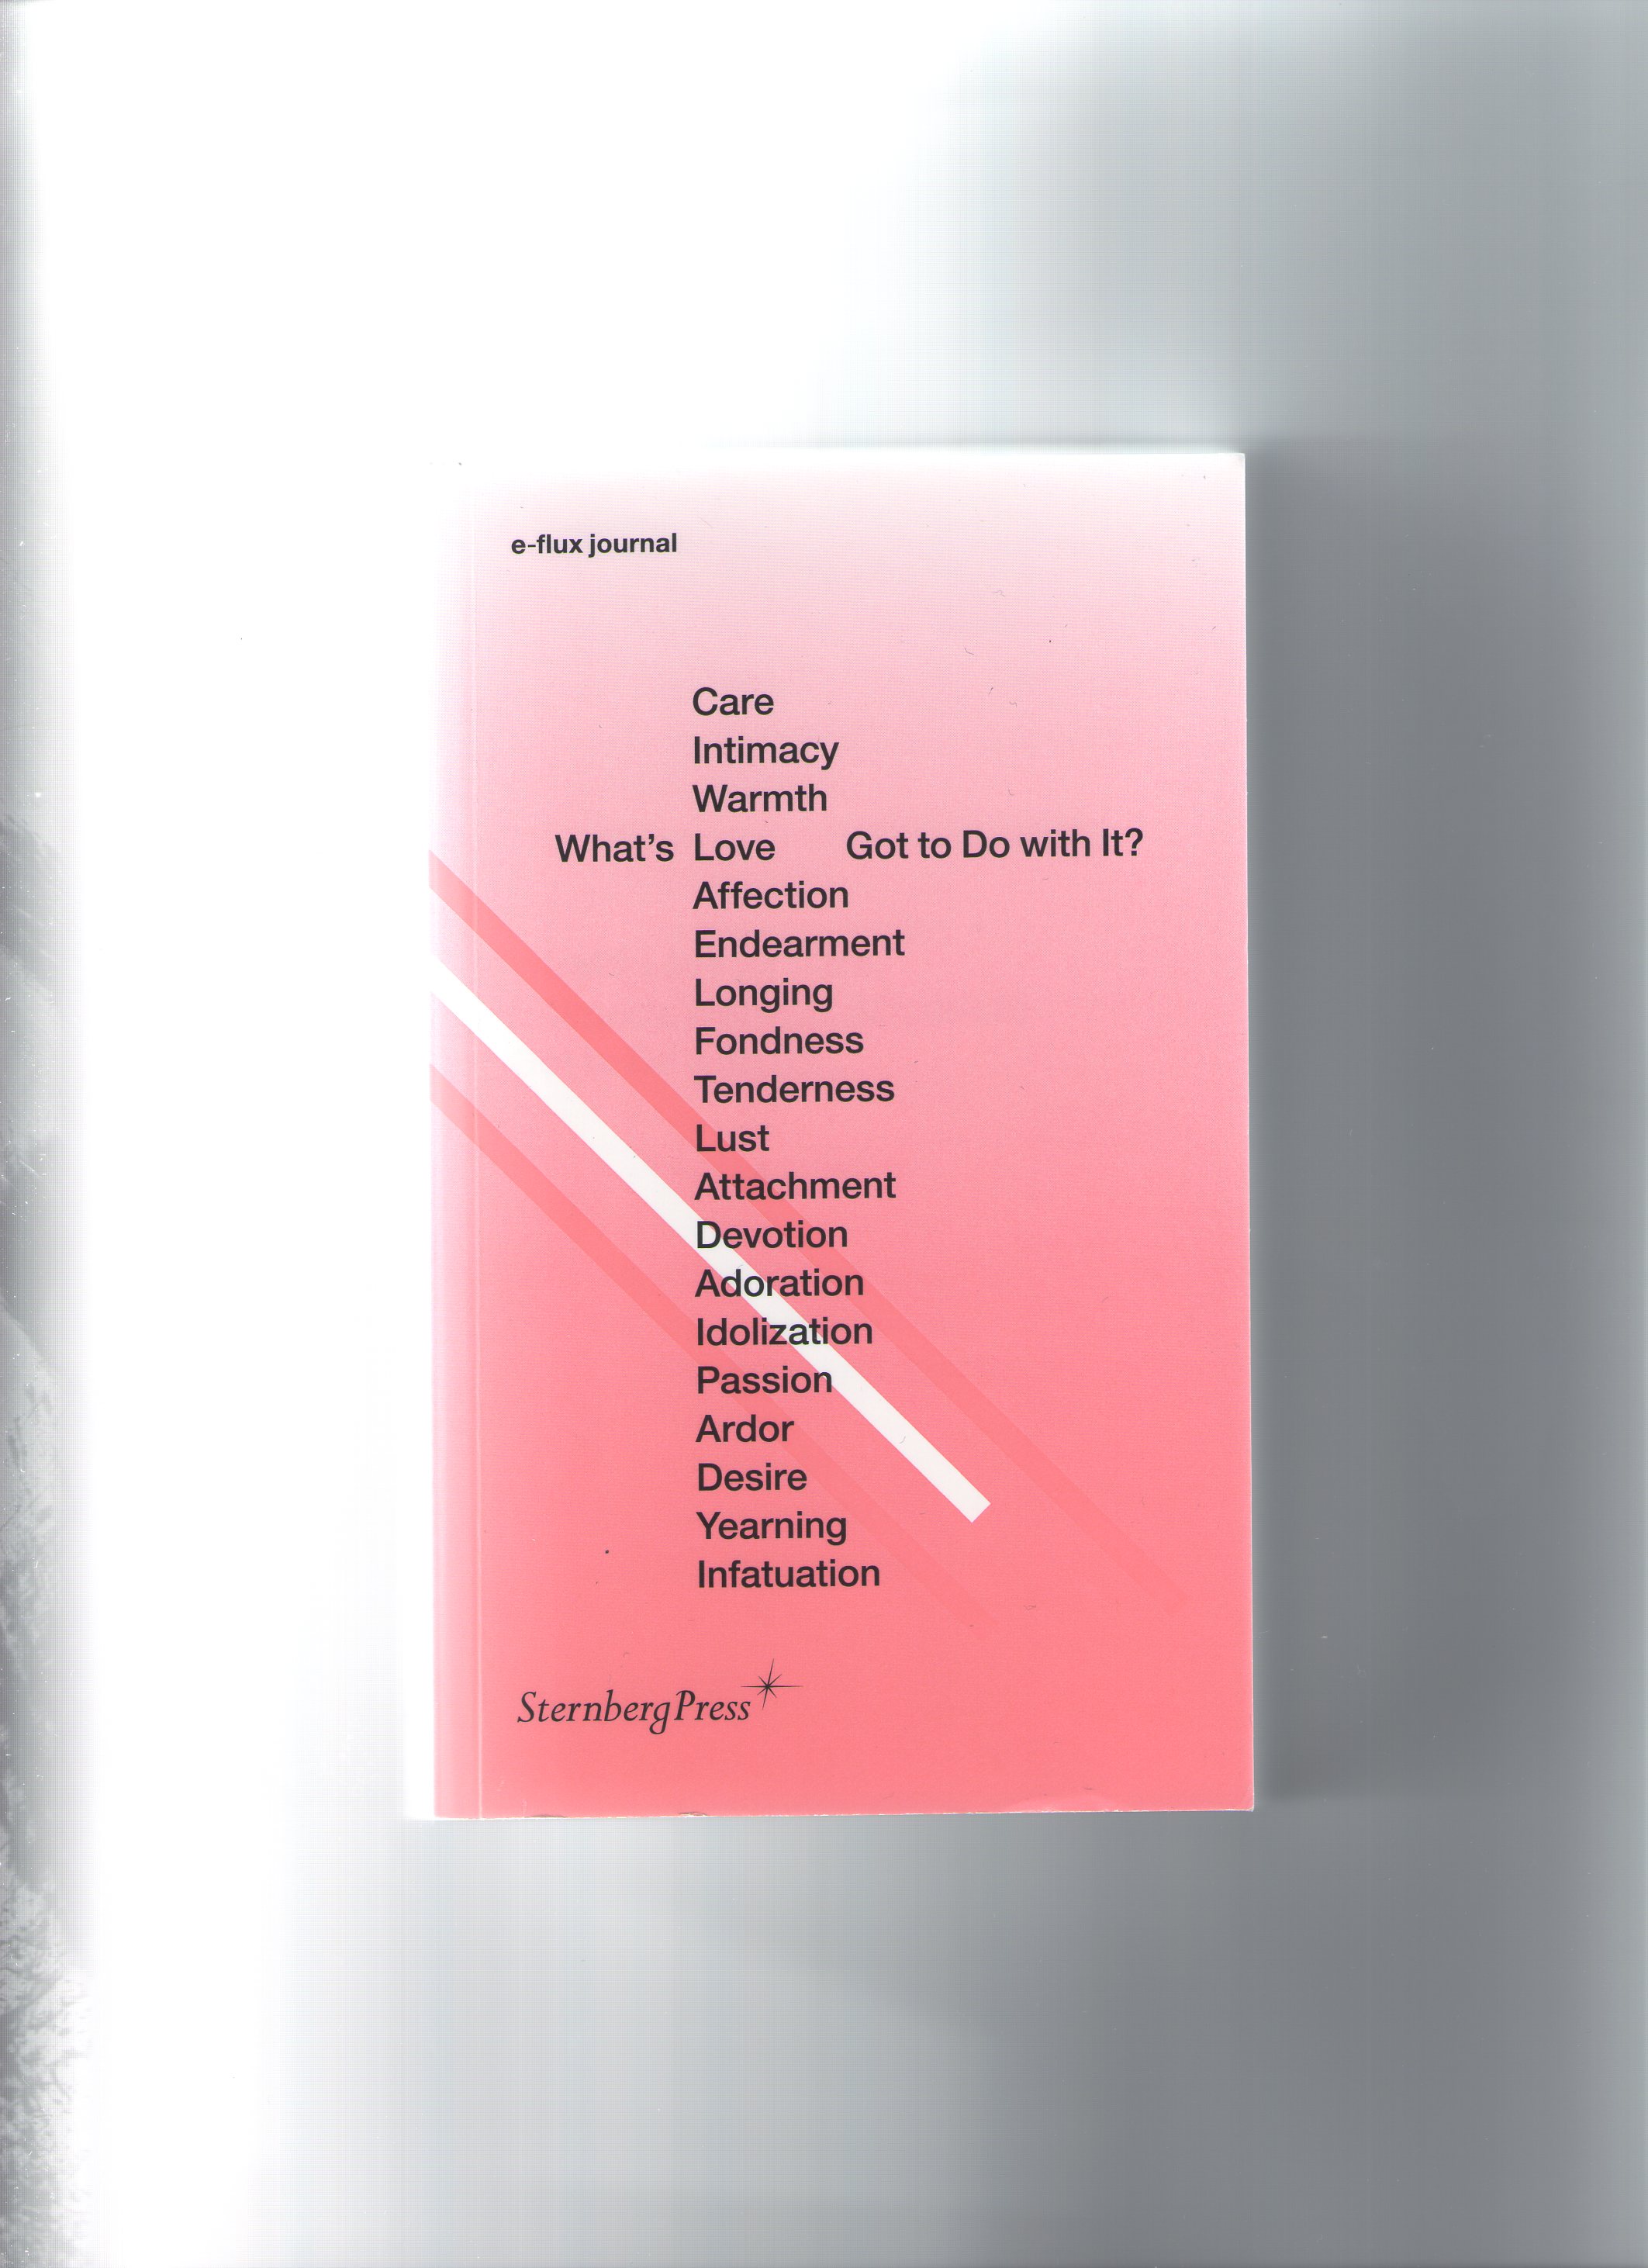 ARANDA, Julieta; WOOD, Brian Kuan; CAIN-NIELSEN, Kaye; SQUIBB, Stephen; VIDOKLE, Anton (eds.) - e-flux journal – What's Love (or Care, Intimacy, Warmth, Affection) Got to Do with It?